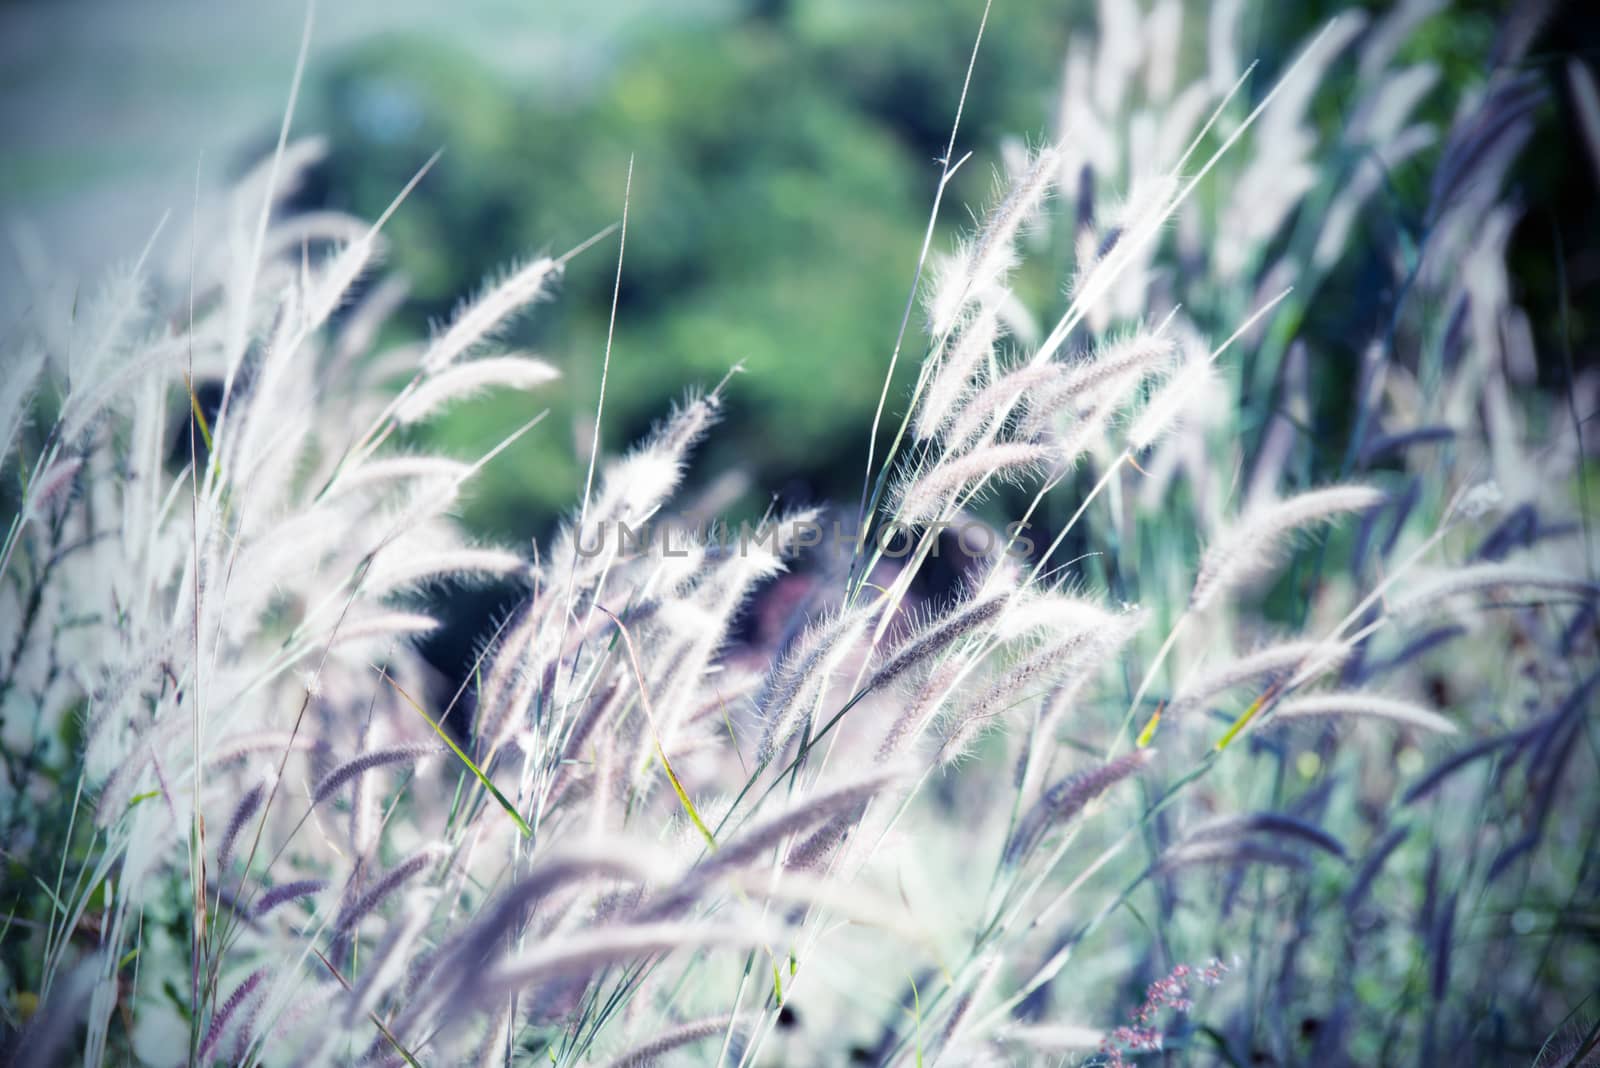 Vintage tone flower of grass in evening time  by jakgree